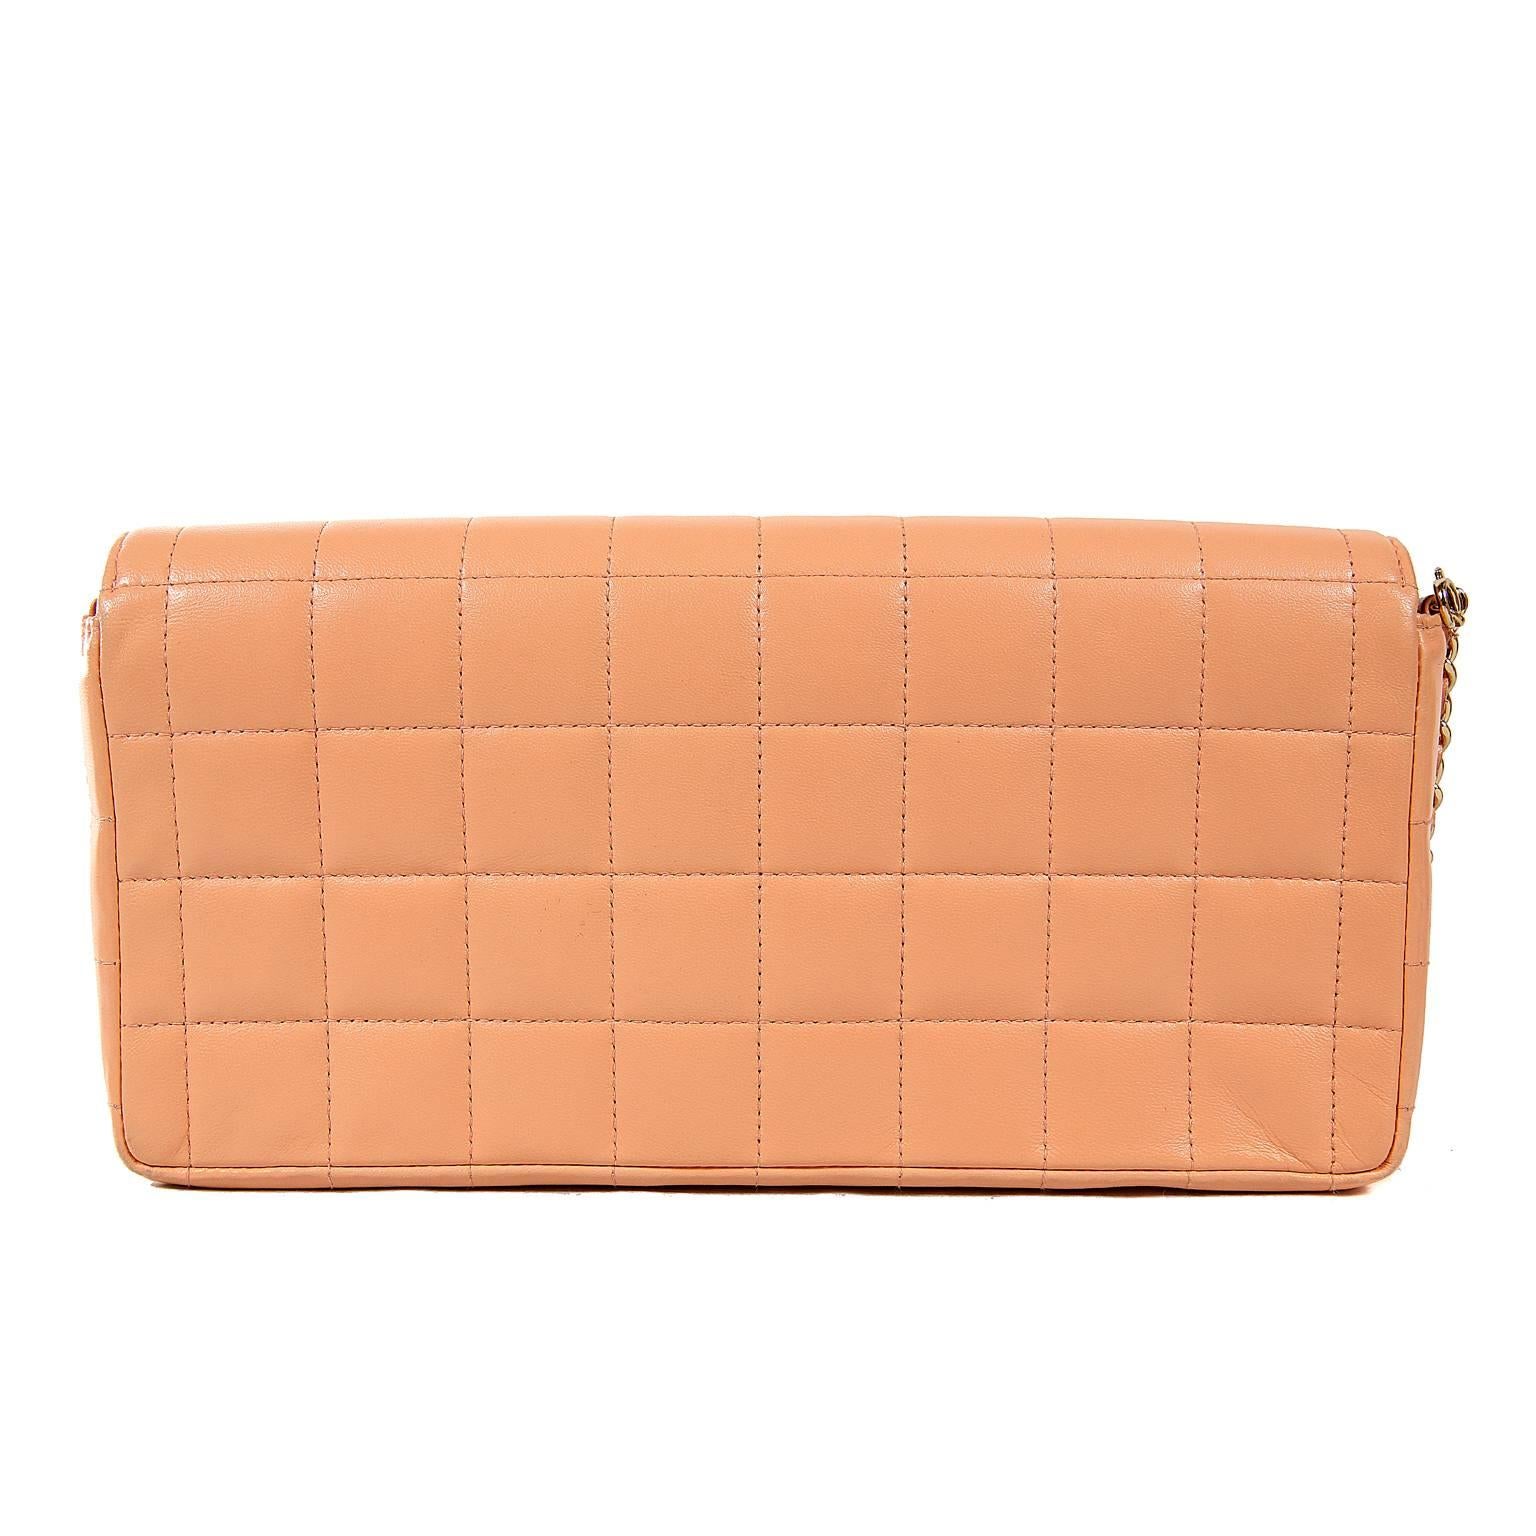 Chanel Pink Leather East West Flap Bag- Excellent Plus Condition
 Simply designed with an optional shoulder strap, the unique color and square quilting makes it a stand out piece.
Pinky salmon leather is quilted in square pattern with gold